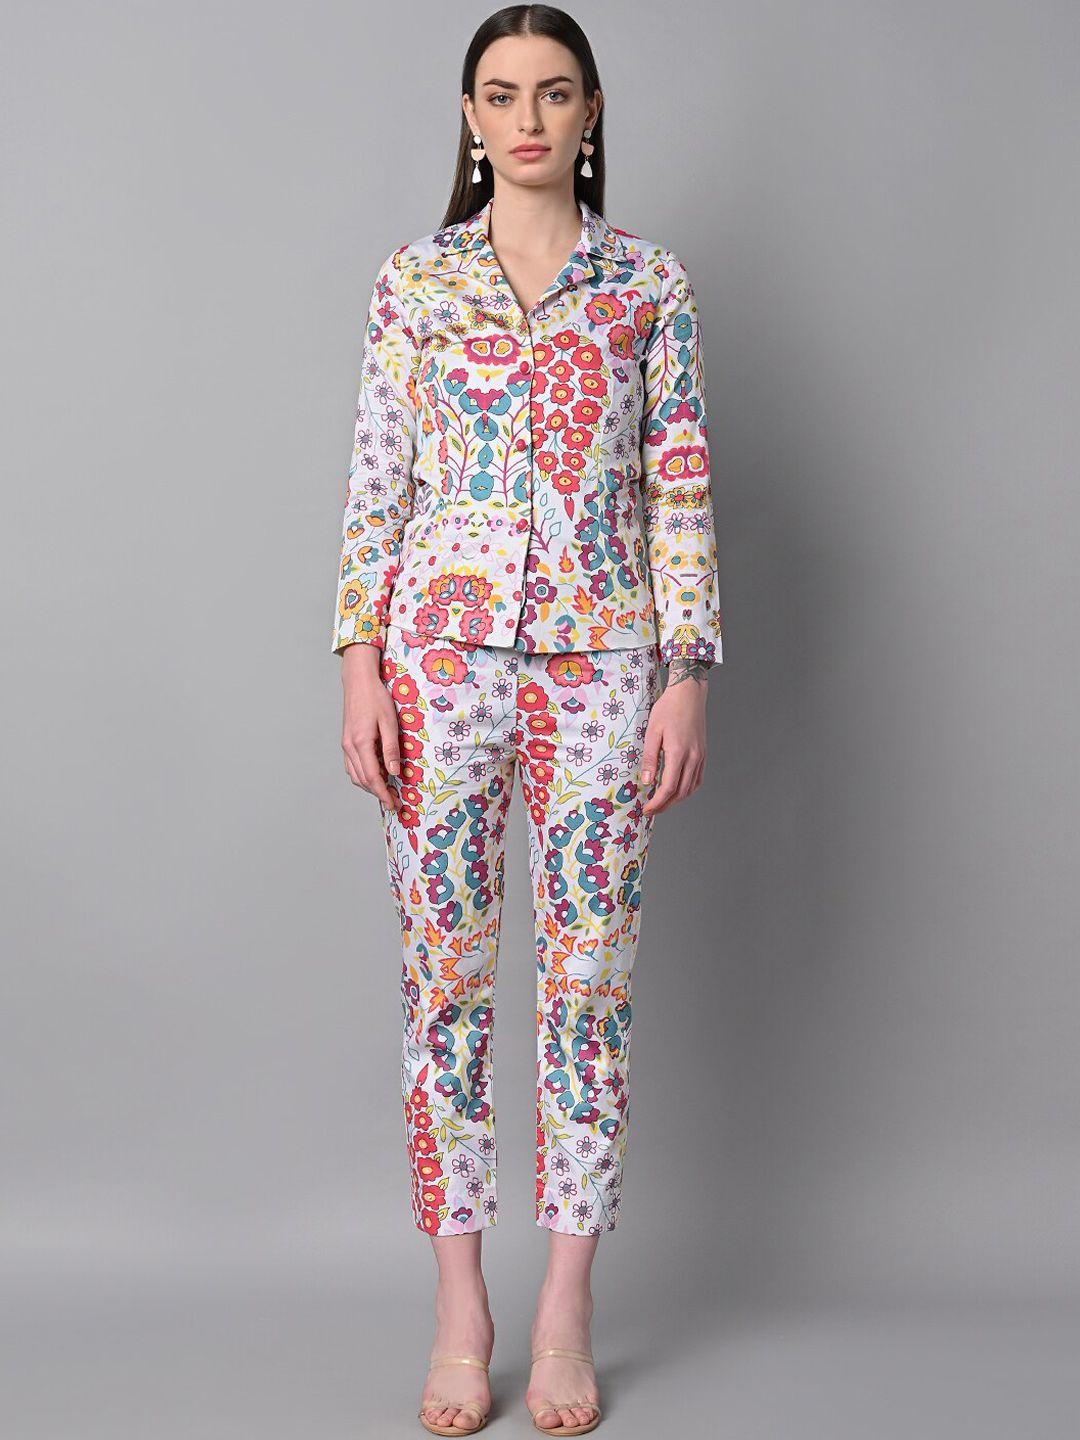 justin whyte floral printed coat with trousers